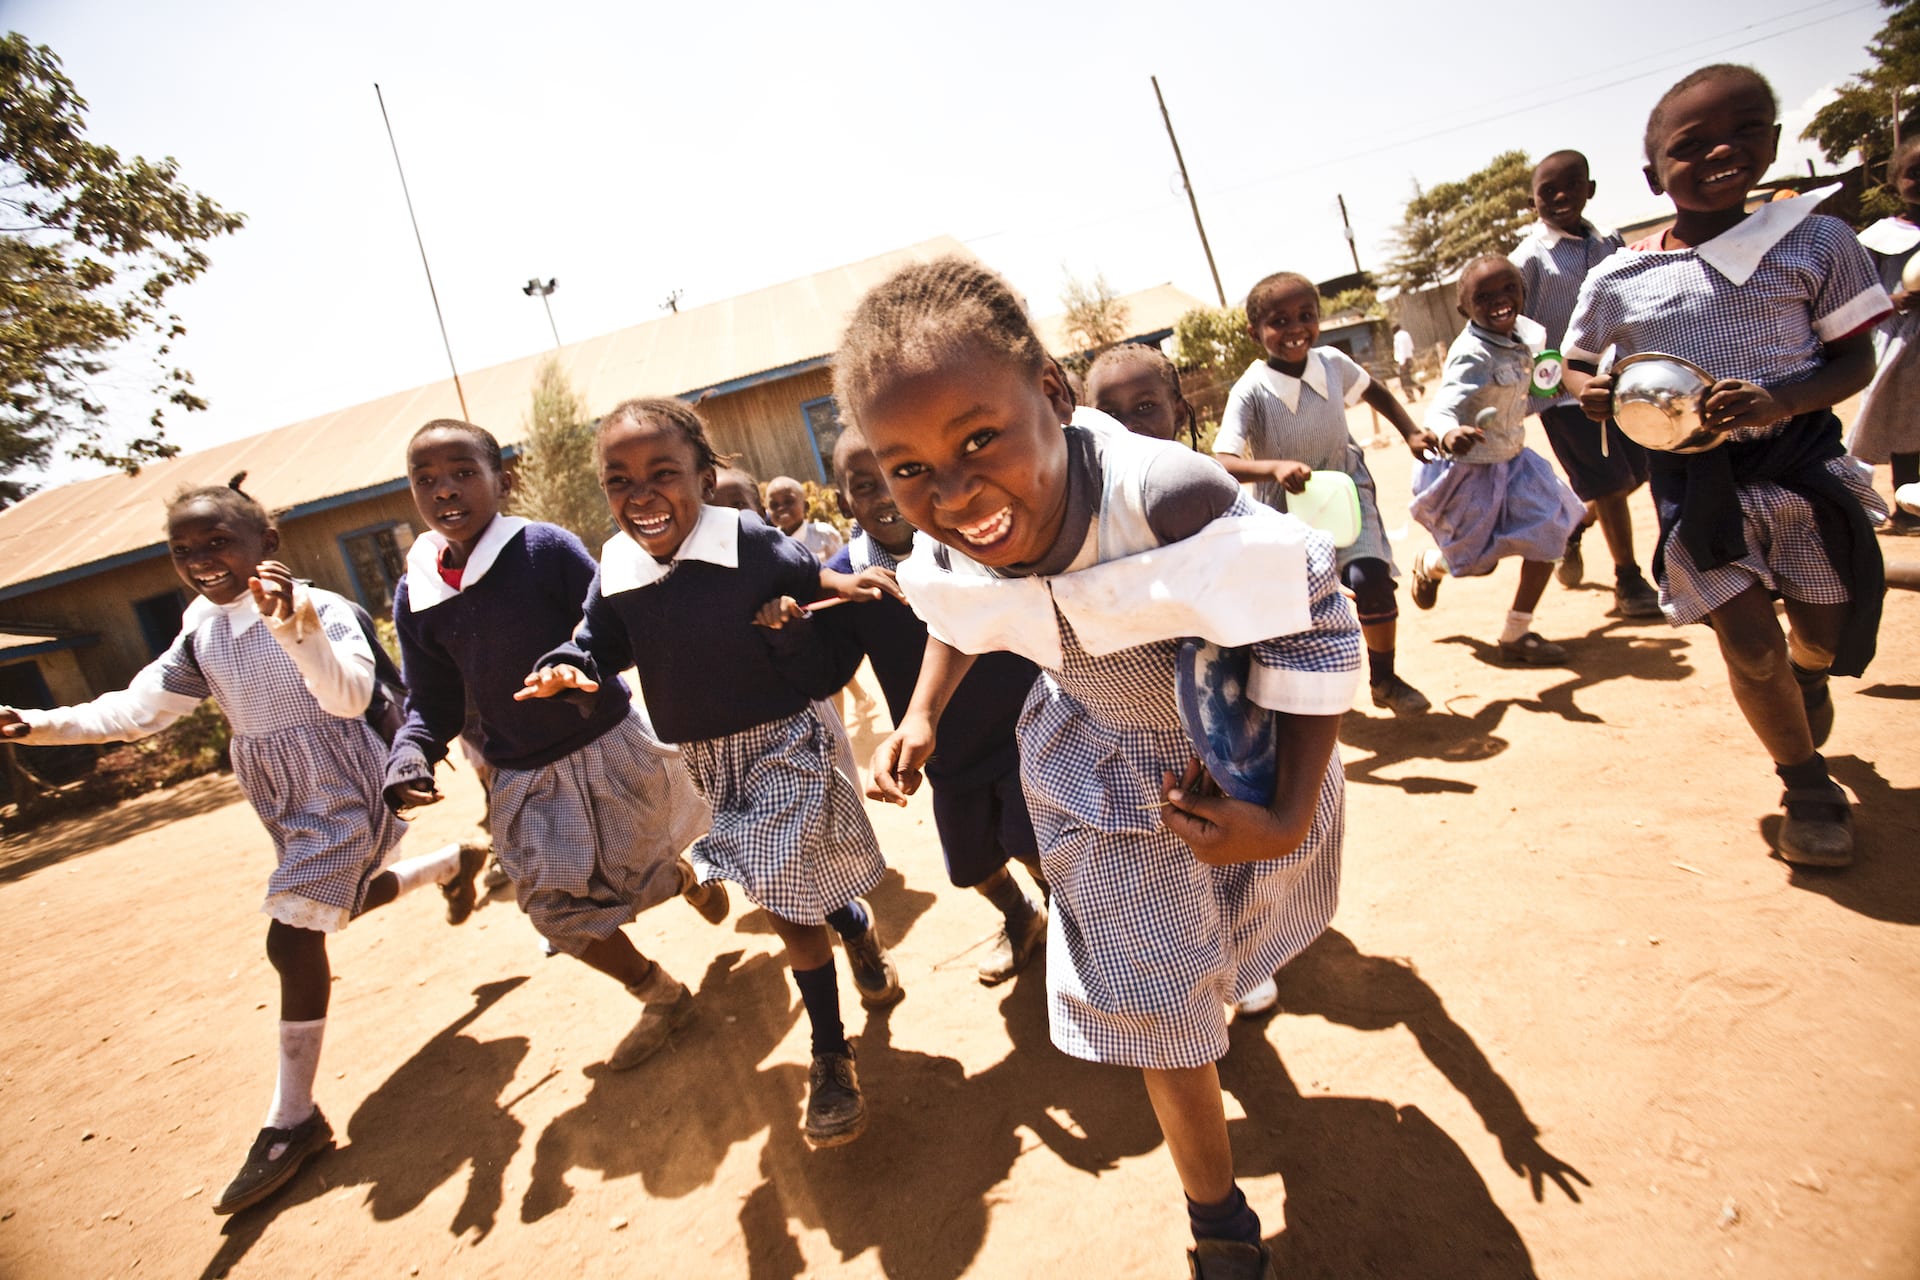 Children smiling and running in a playground in Kenya.